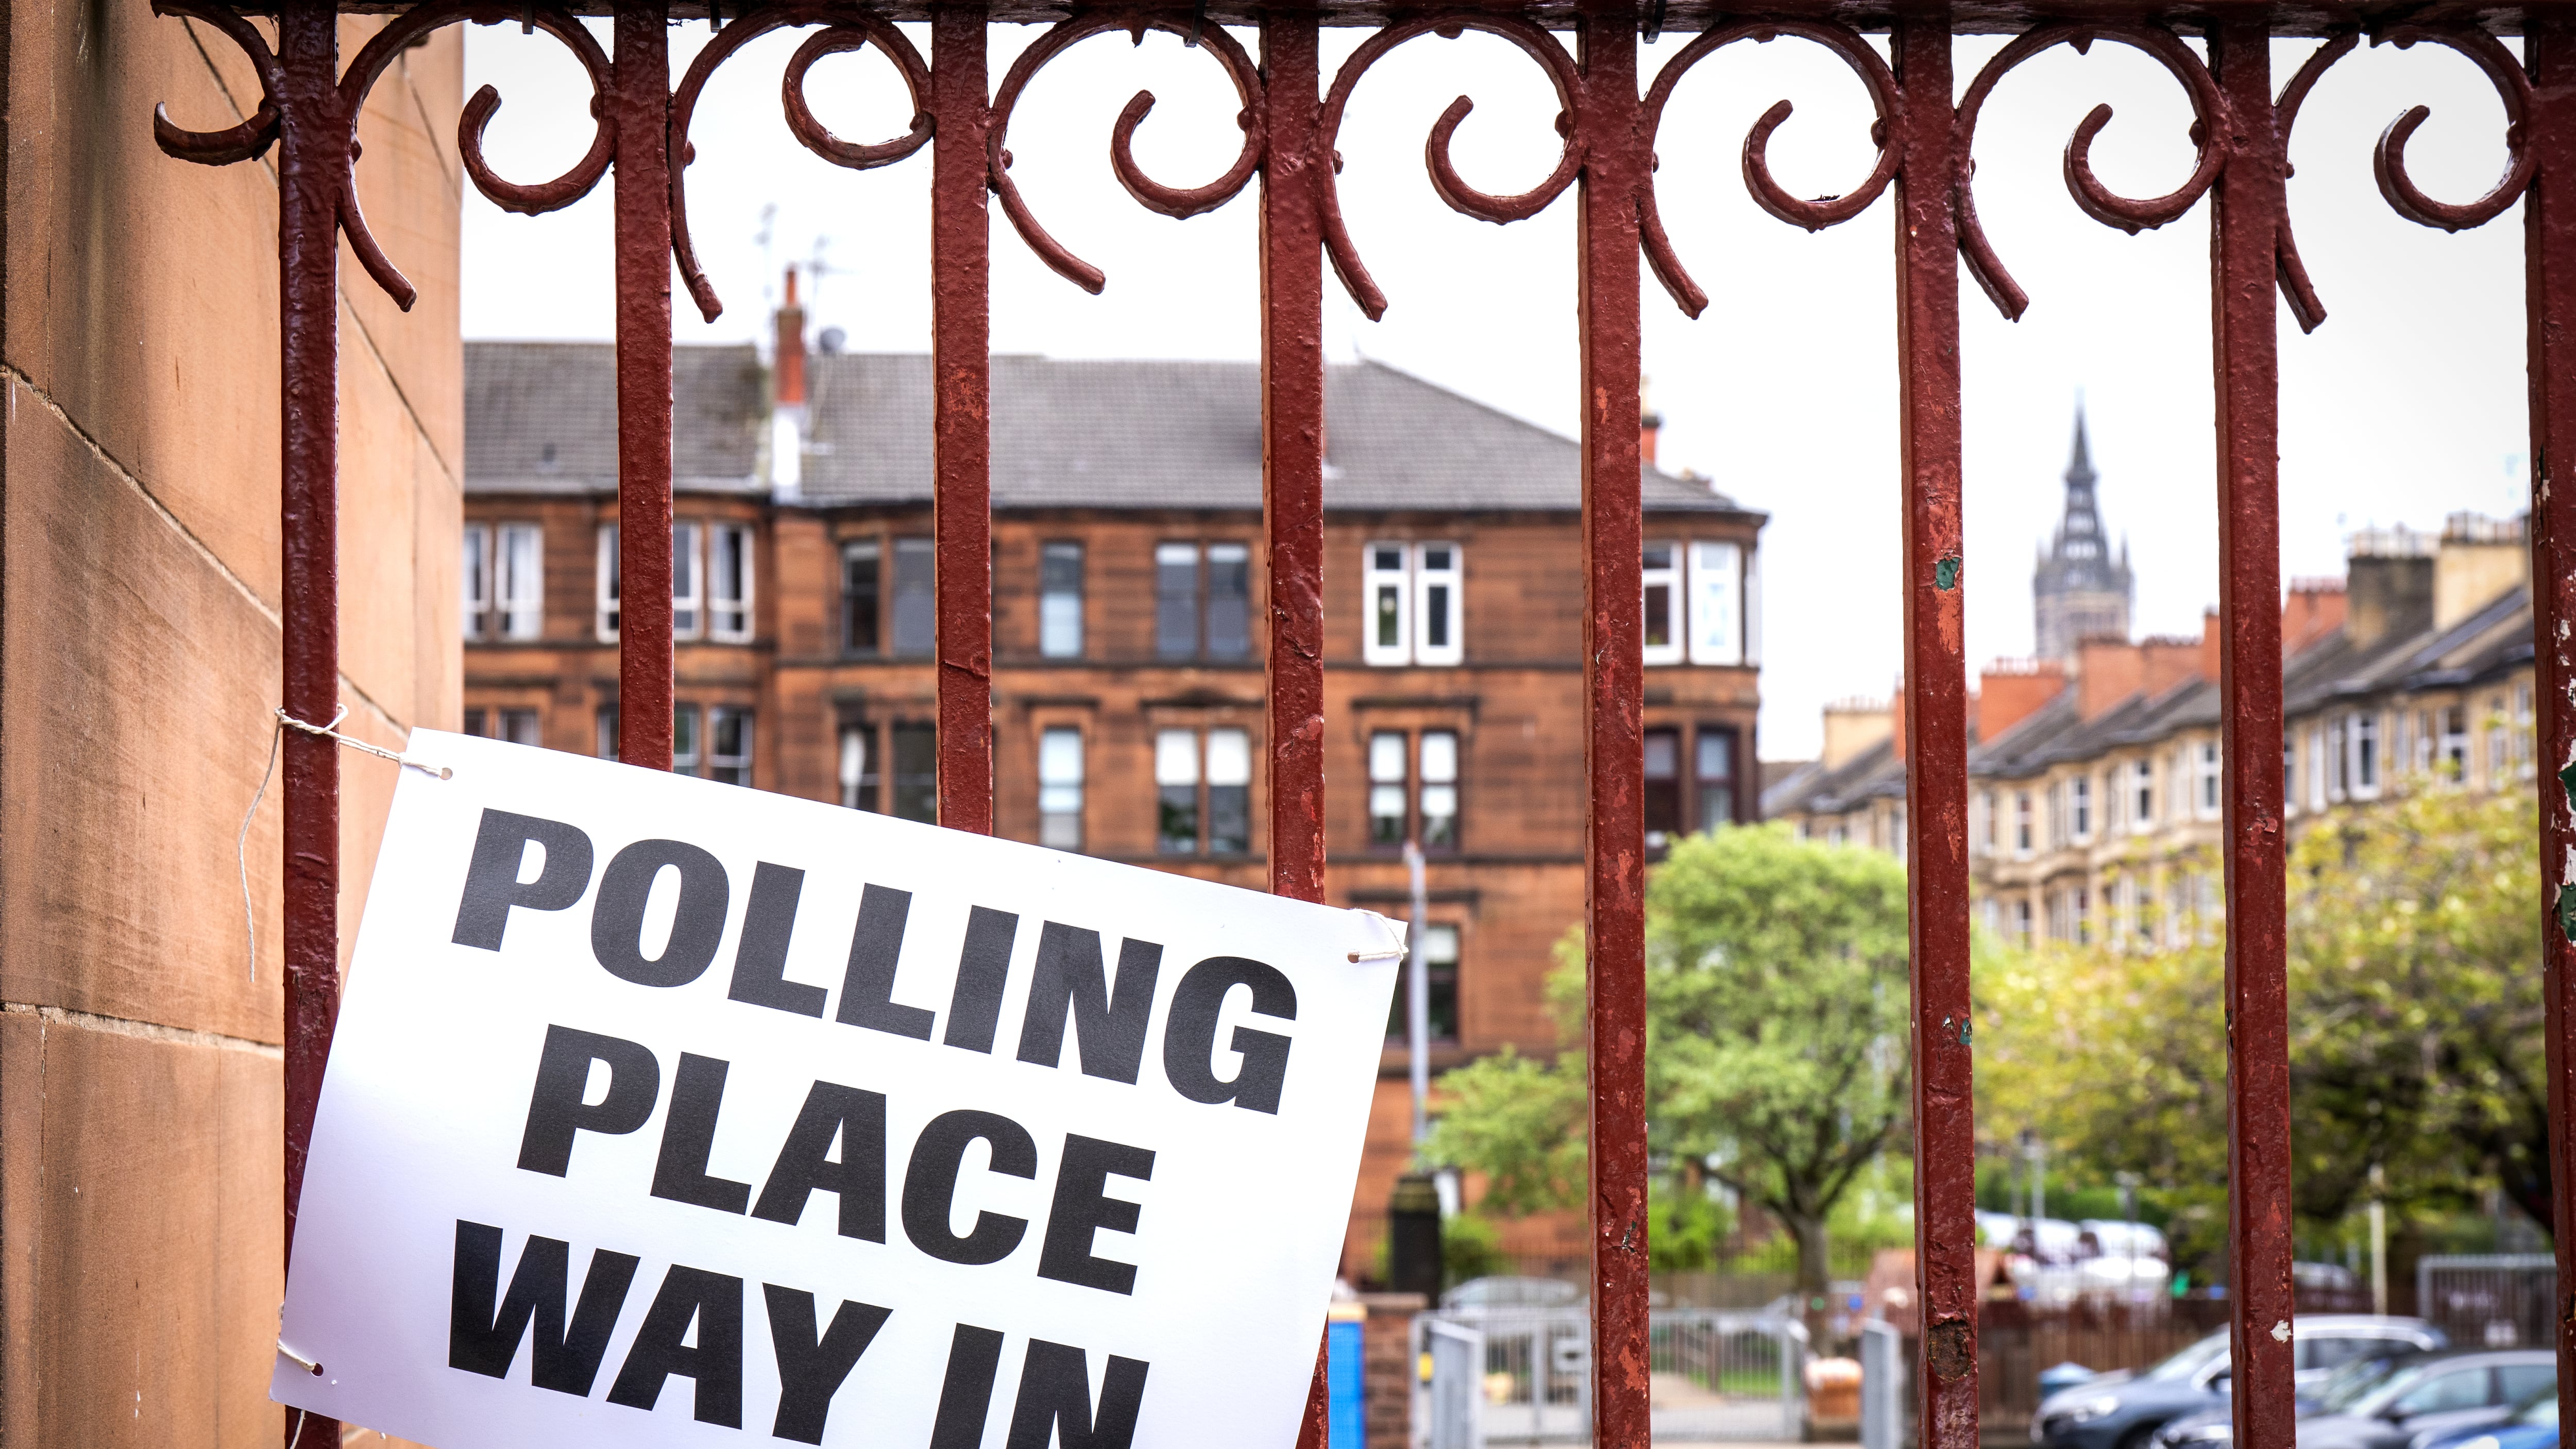 The posters were displayed at a polling station in Glasgow